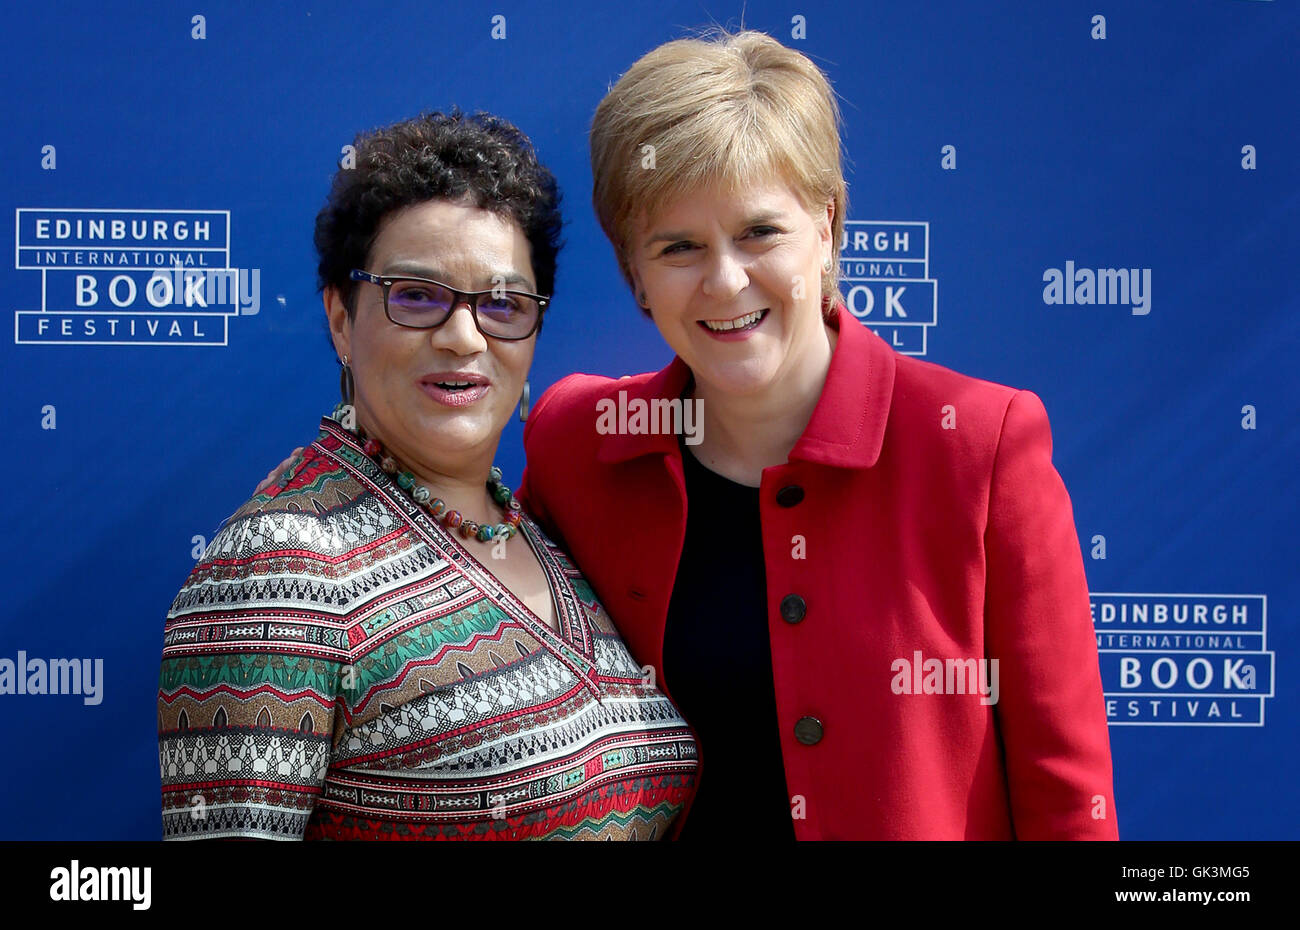 First Minister Nicola Sturgeon with Scotland's Makar, Jackie Kay, (left) before taking part in an event at the Edinburgh International Book Festival where they discussed the poems Kay is producing in her role as Makar and SturgeonÃ•s Reading Challenge. Stock Photo